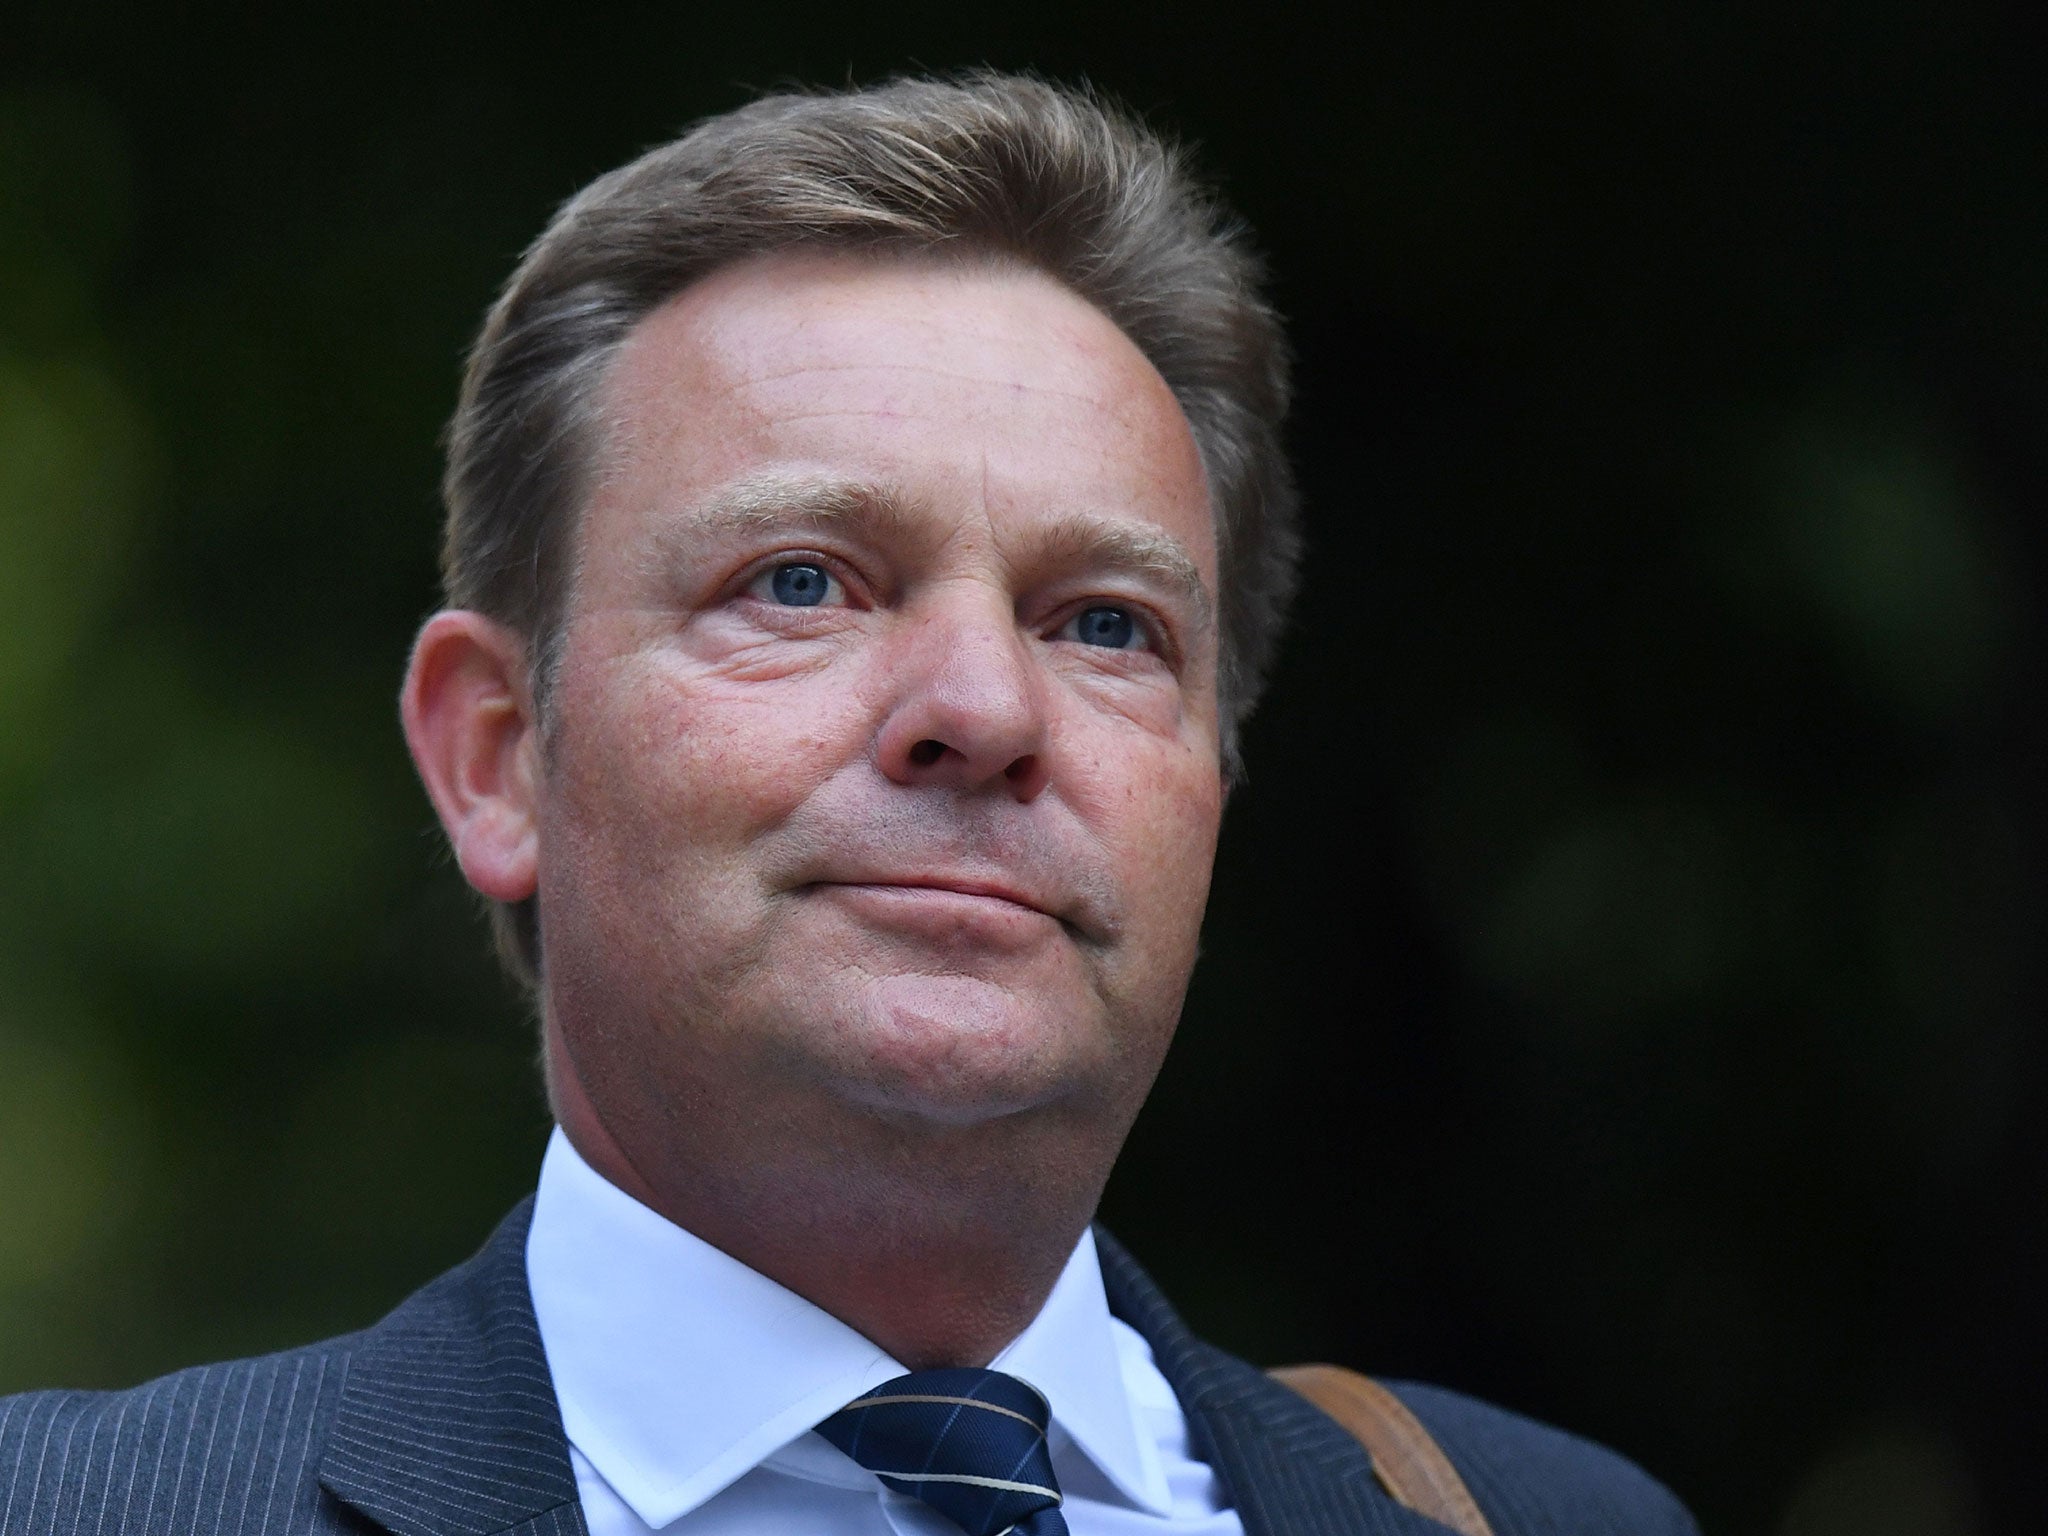 Craig Mackinlay has been MP for South Thanet in Kent since 2015